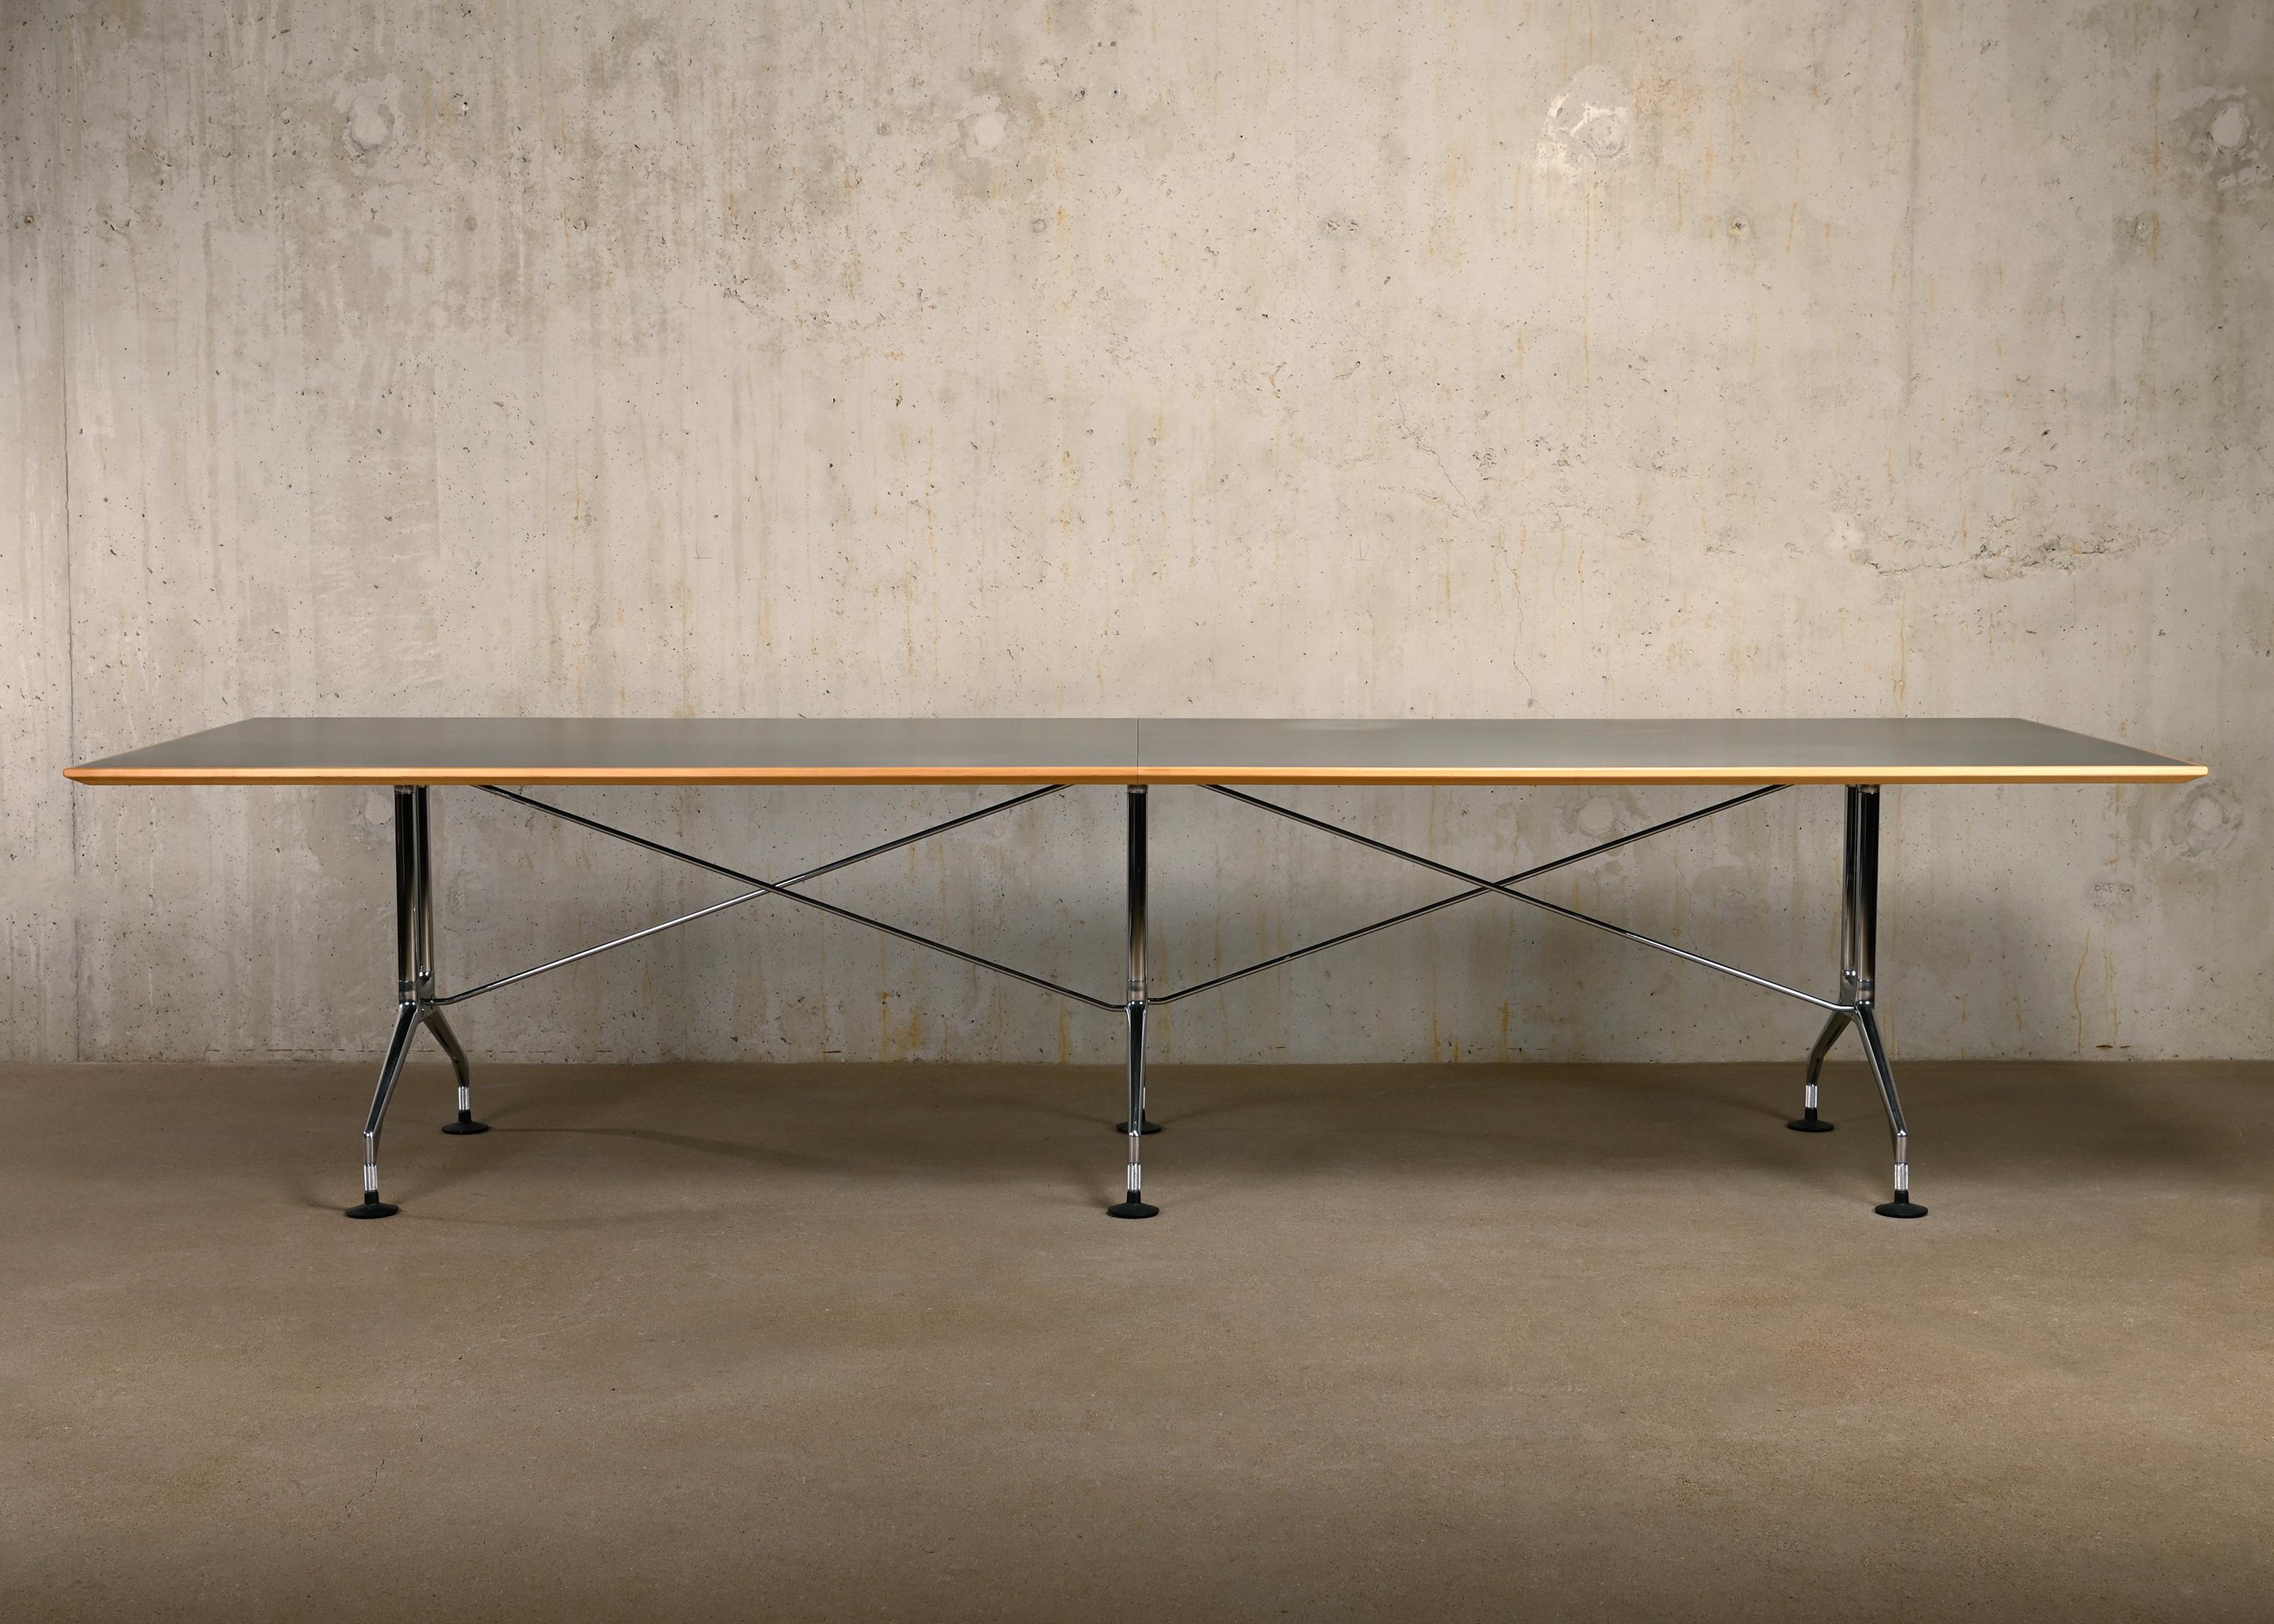 Post-Modern Antonio Citterio Spatio Table in Maple / Linoleum tabletop and Chrome for Vitra